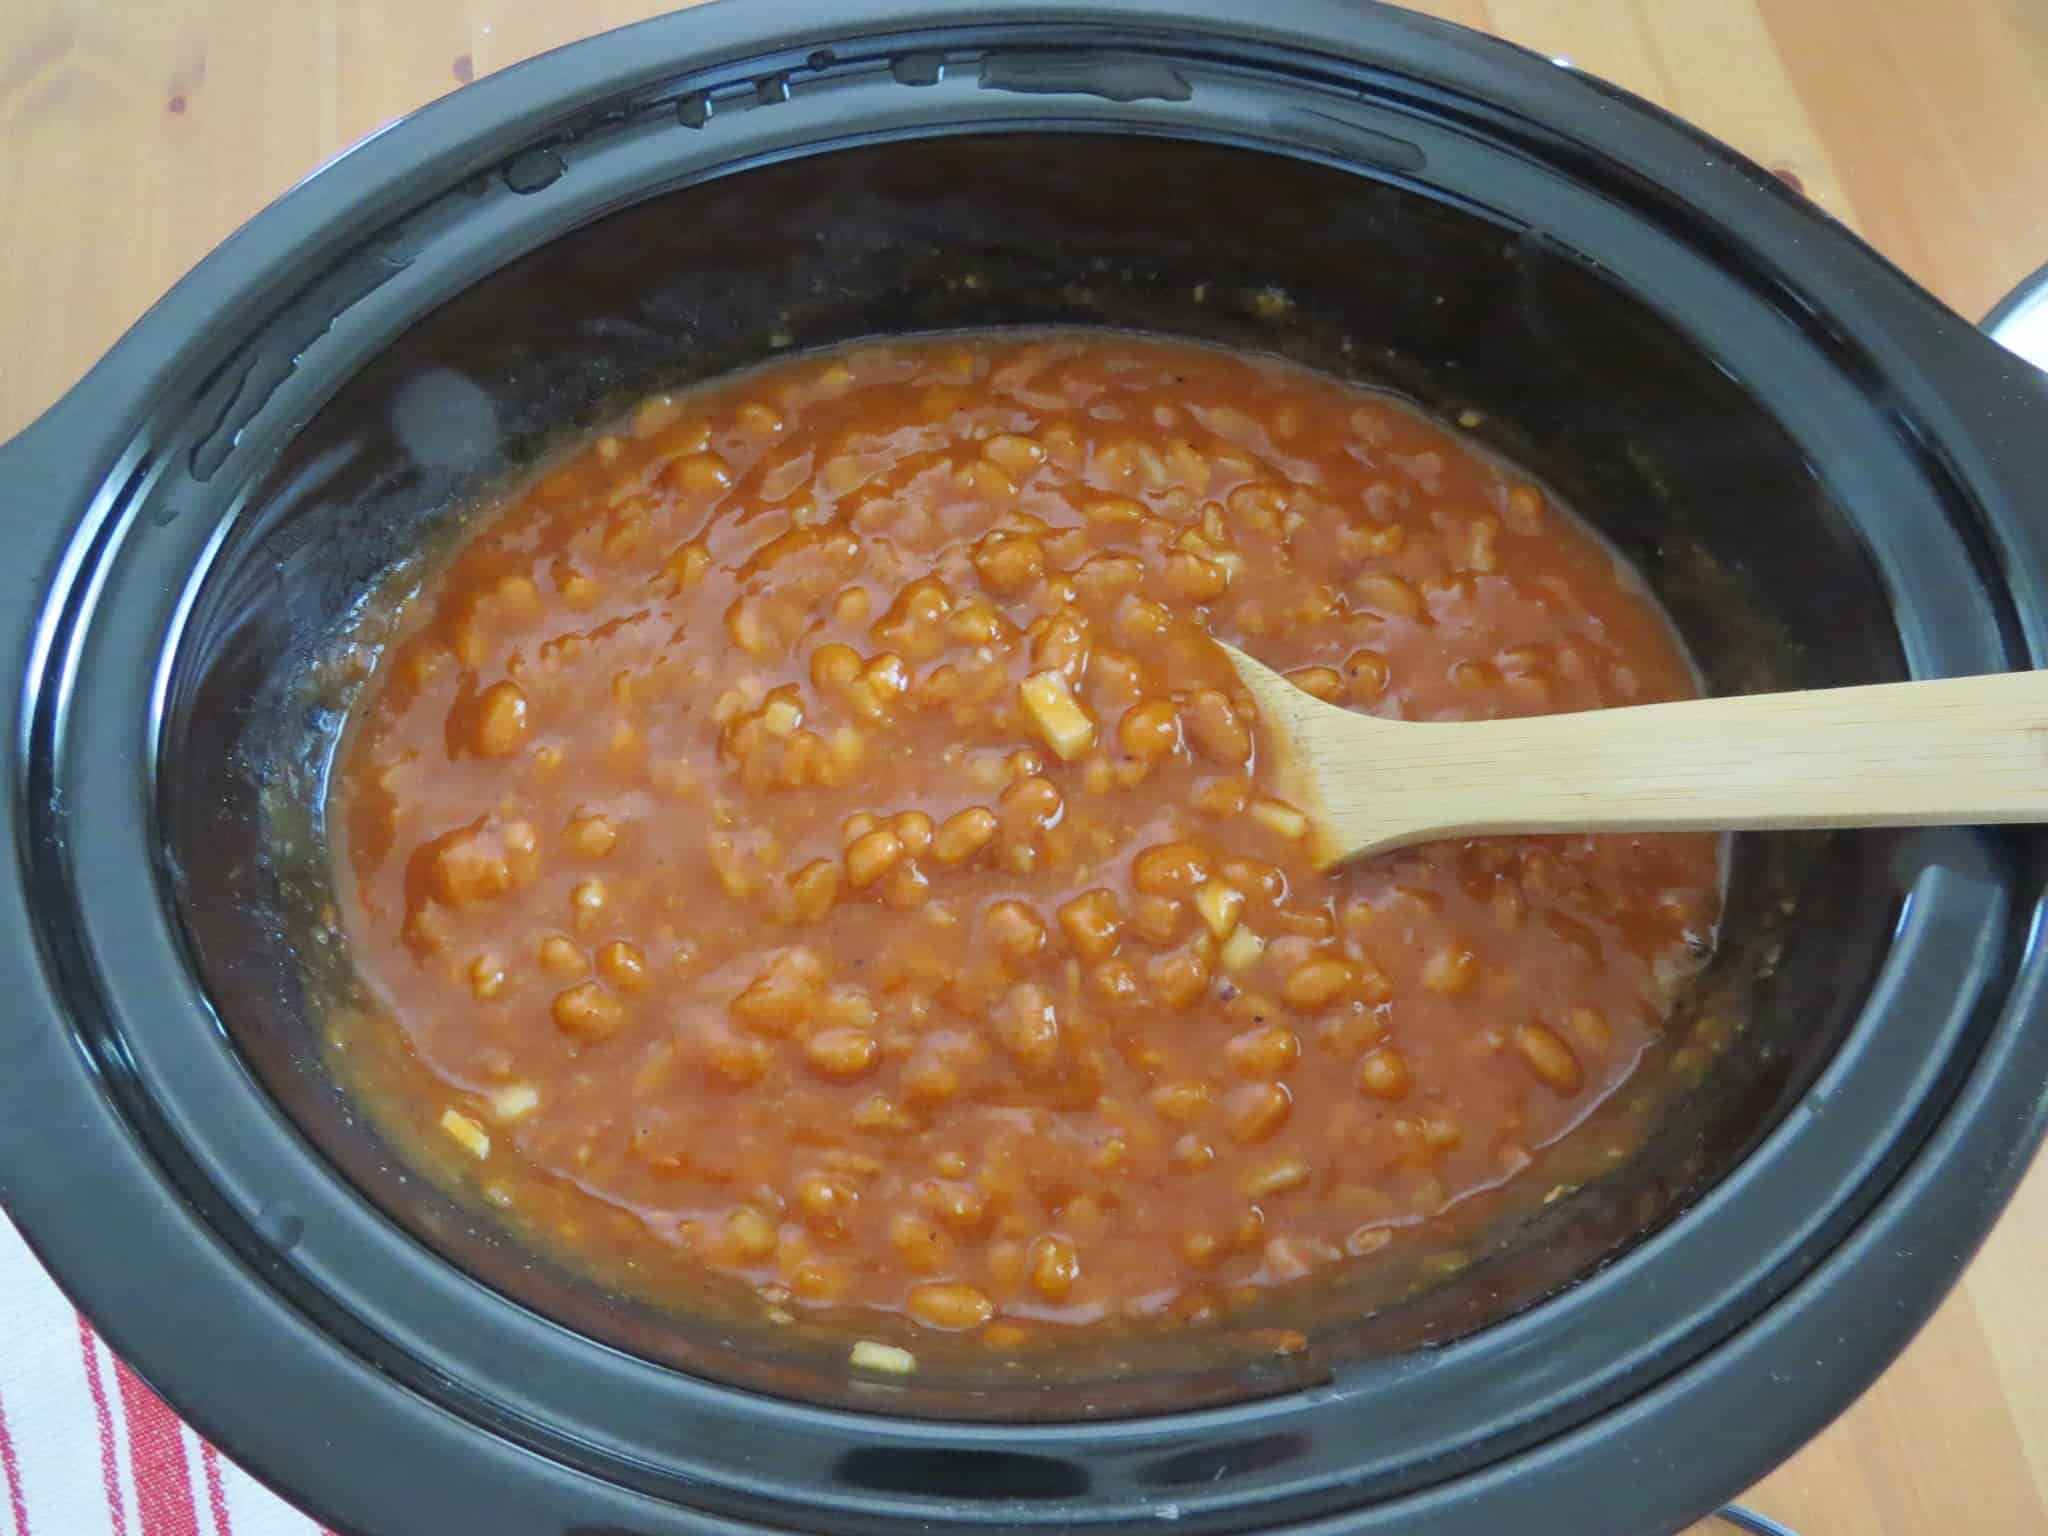 a wooden spoon shown stirring baked beans.